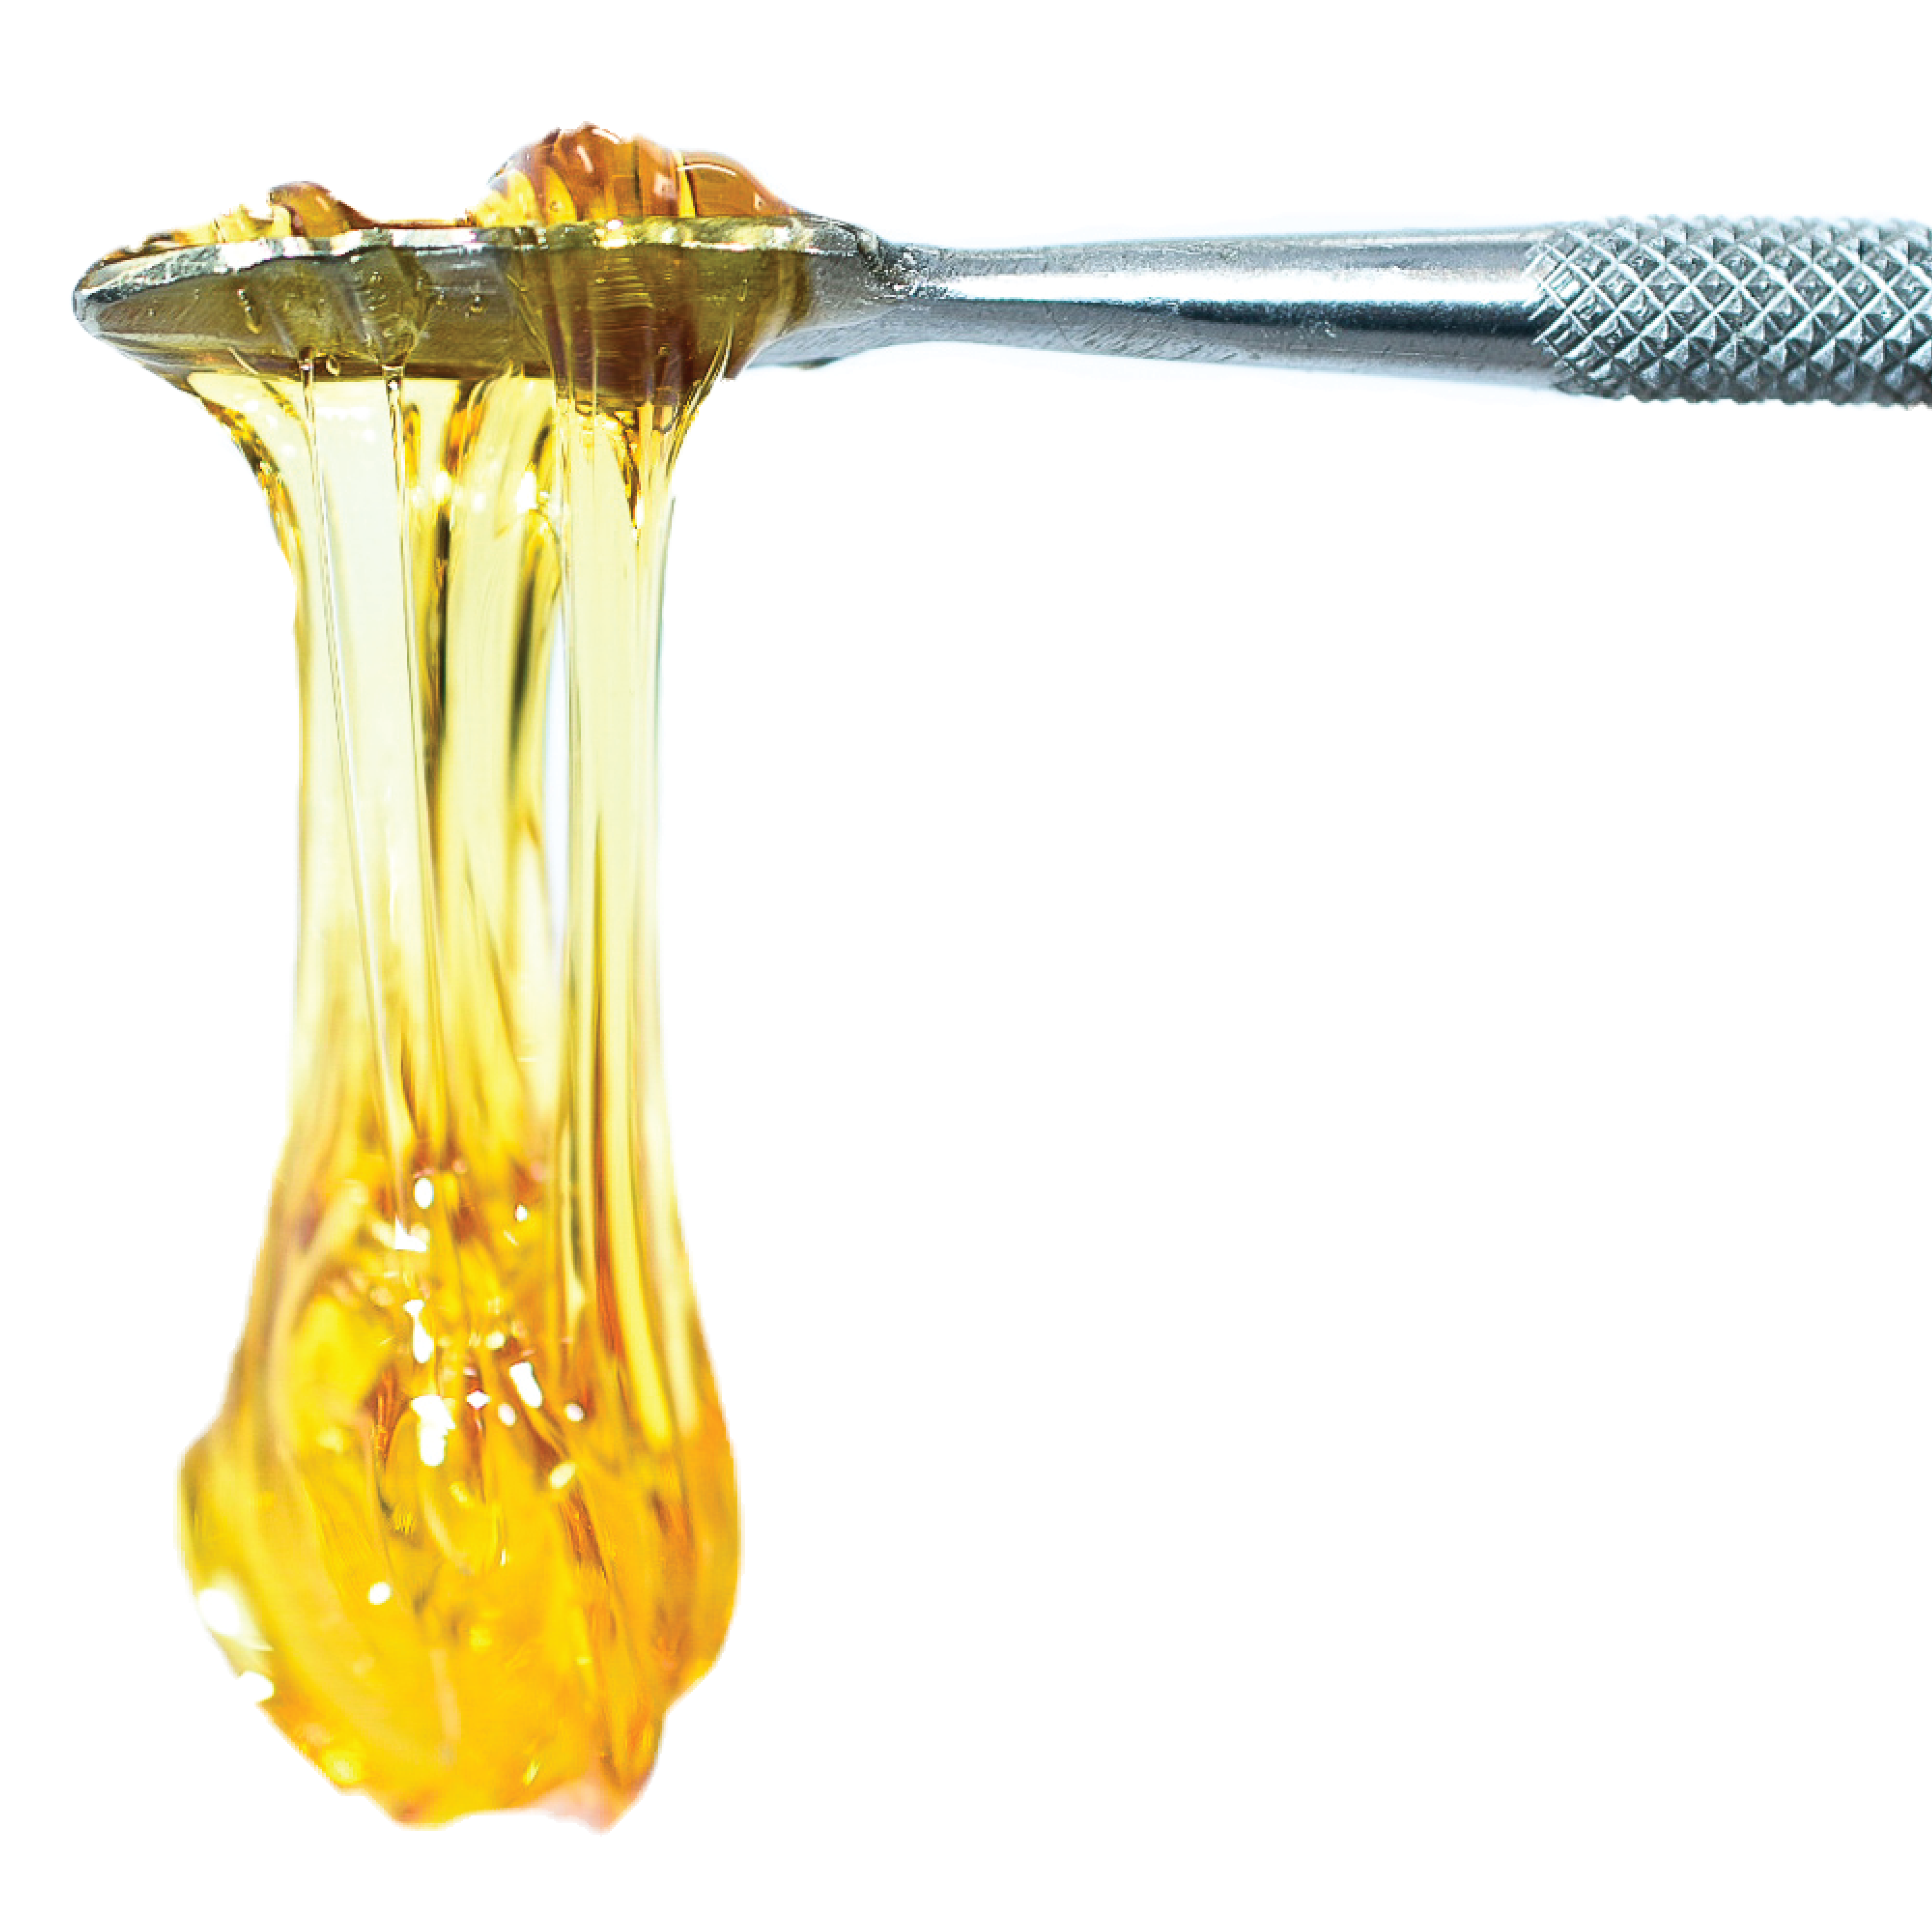 a spoon with a yellow liquid flowing out of it